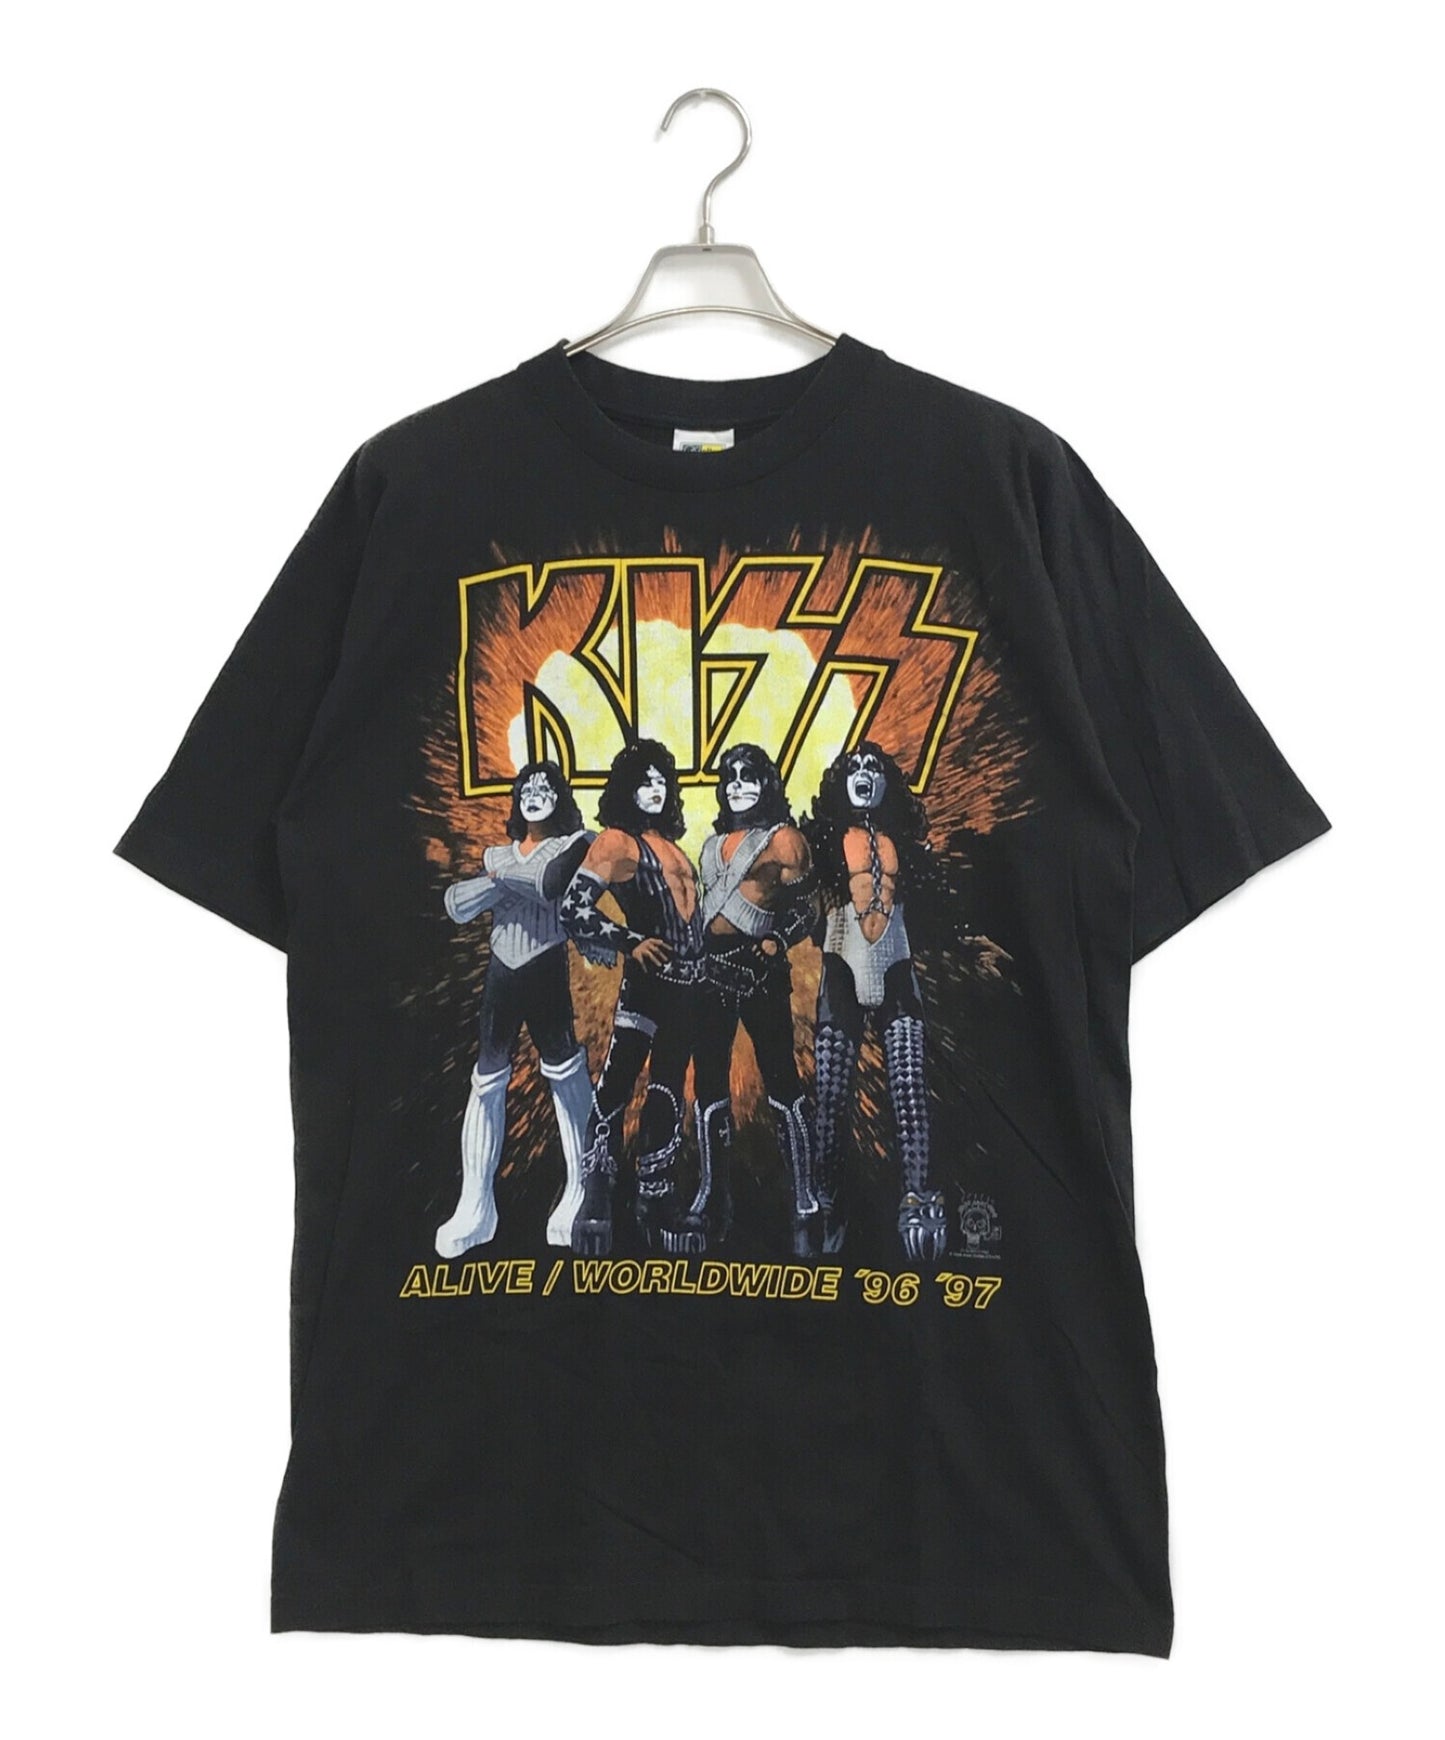 [Pre-owned] KISS 1996 tour Band T-Shirt